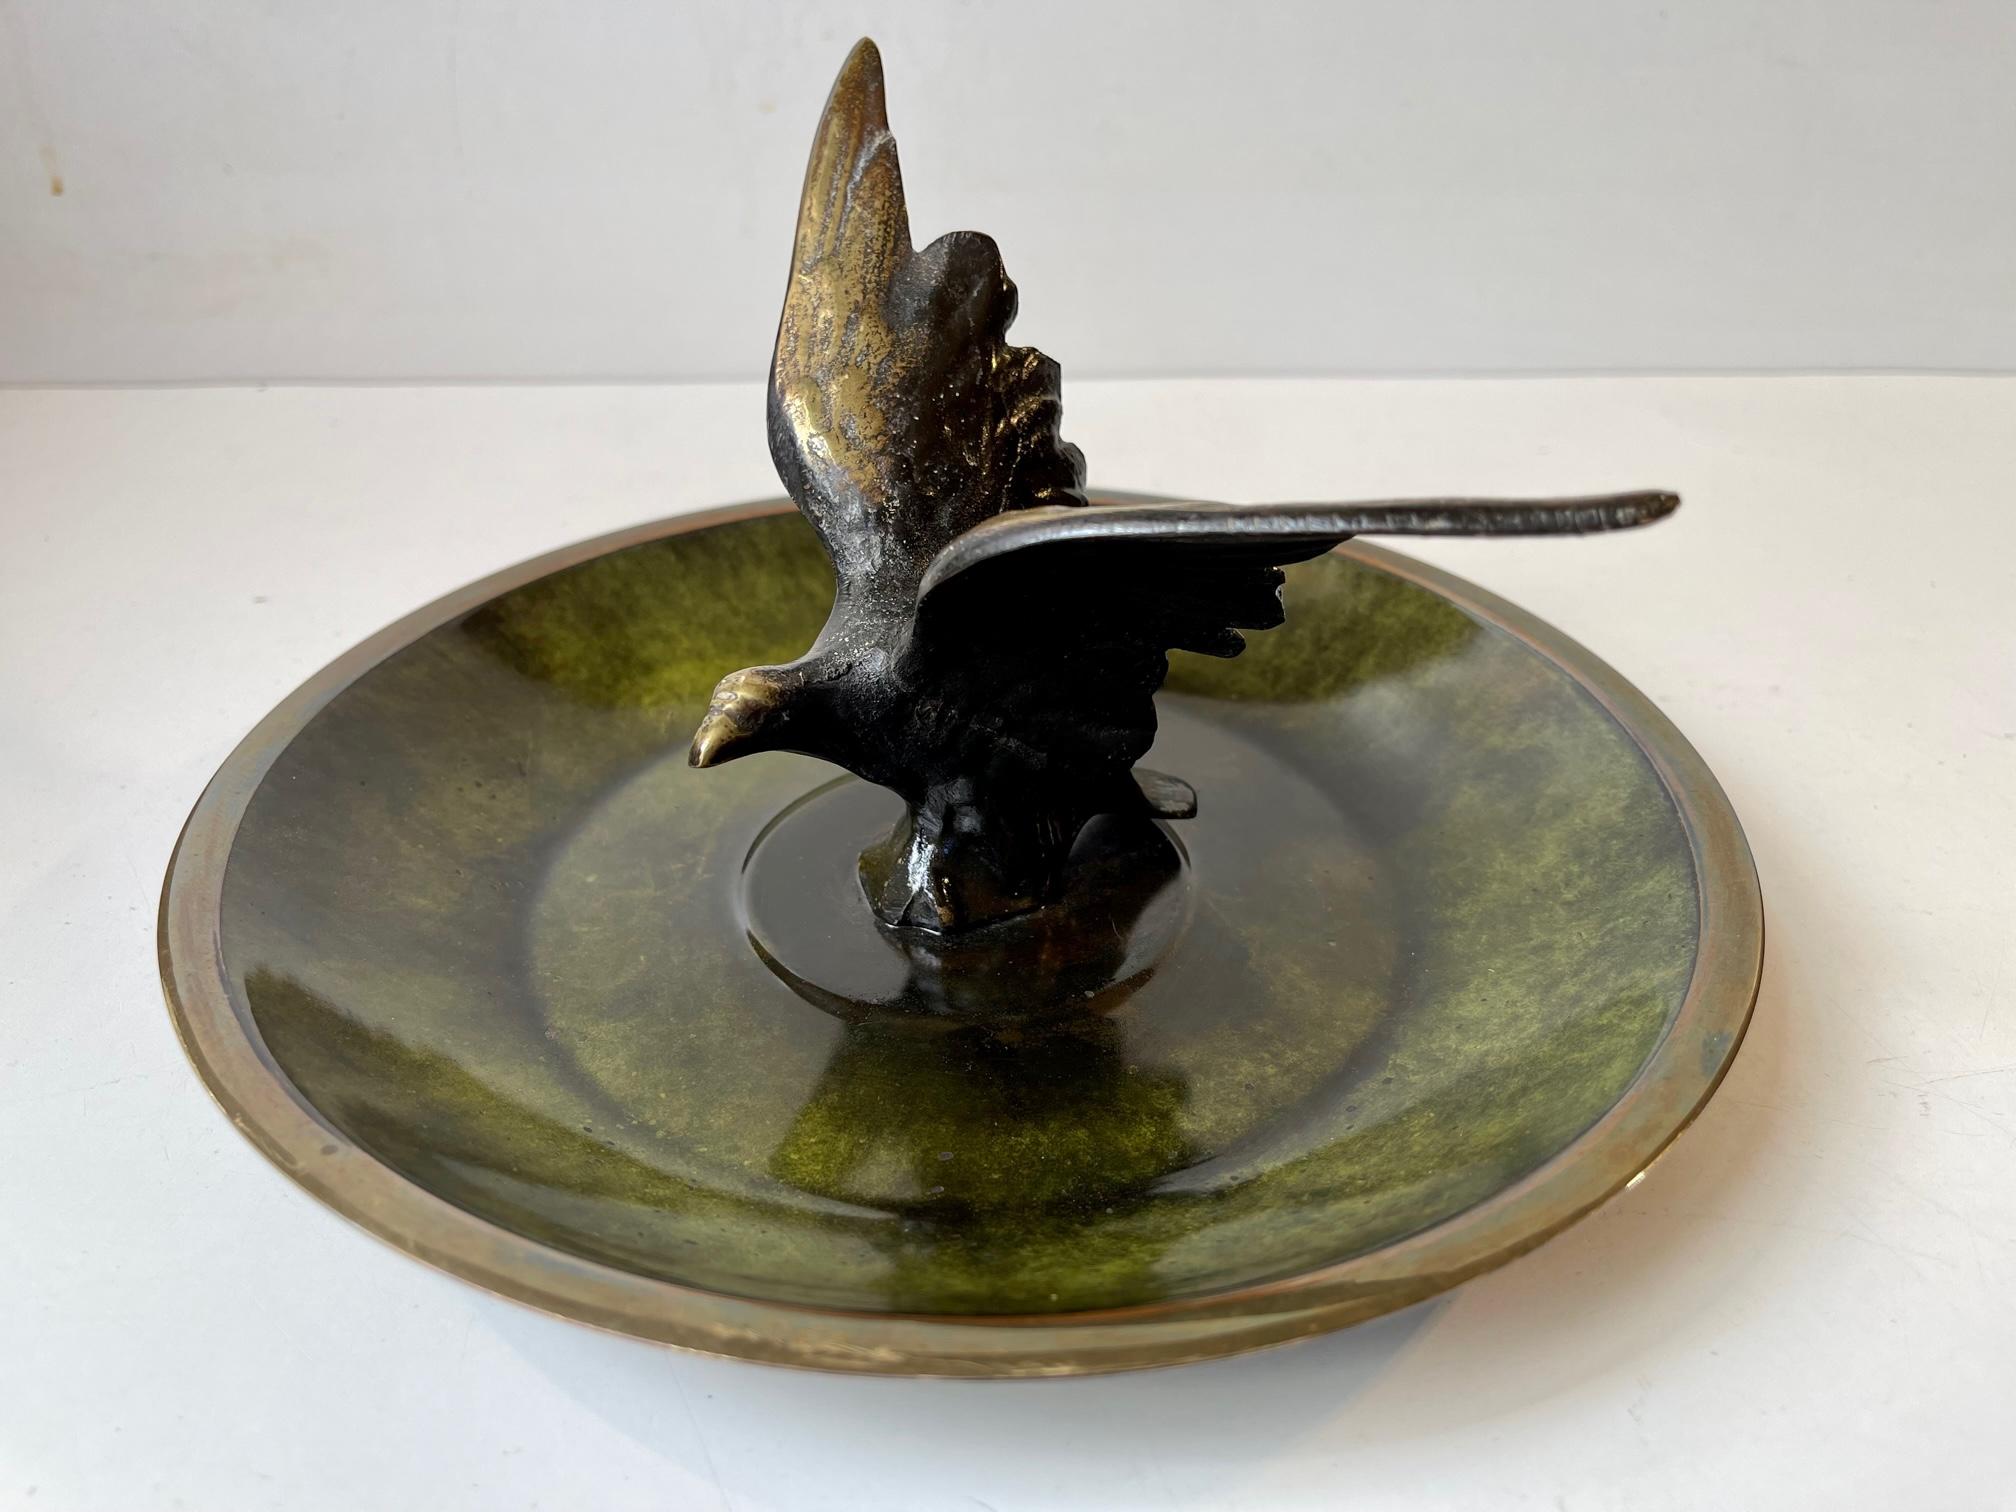 Bronze bowl with applied verdigris patina (cold paint) in diffrent 'green's'. Sculptural center figurine in shape of an eagle. It was designed and manufactured in Denmark during the 1930s or 40s. Marked bronze and signed indistinguishable.